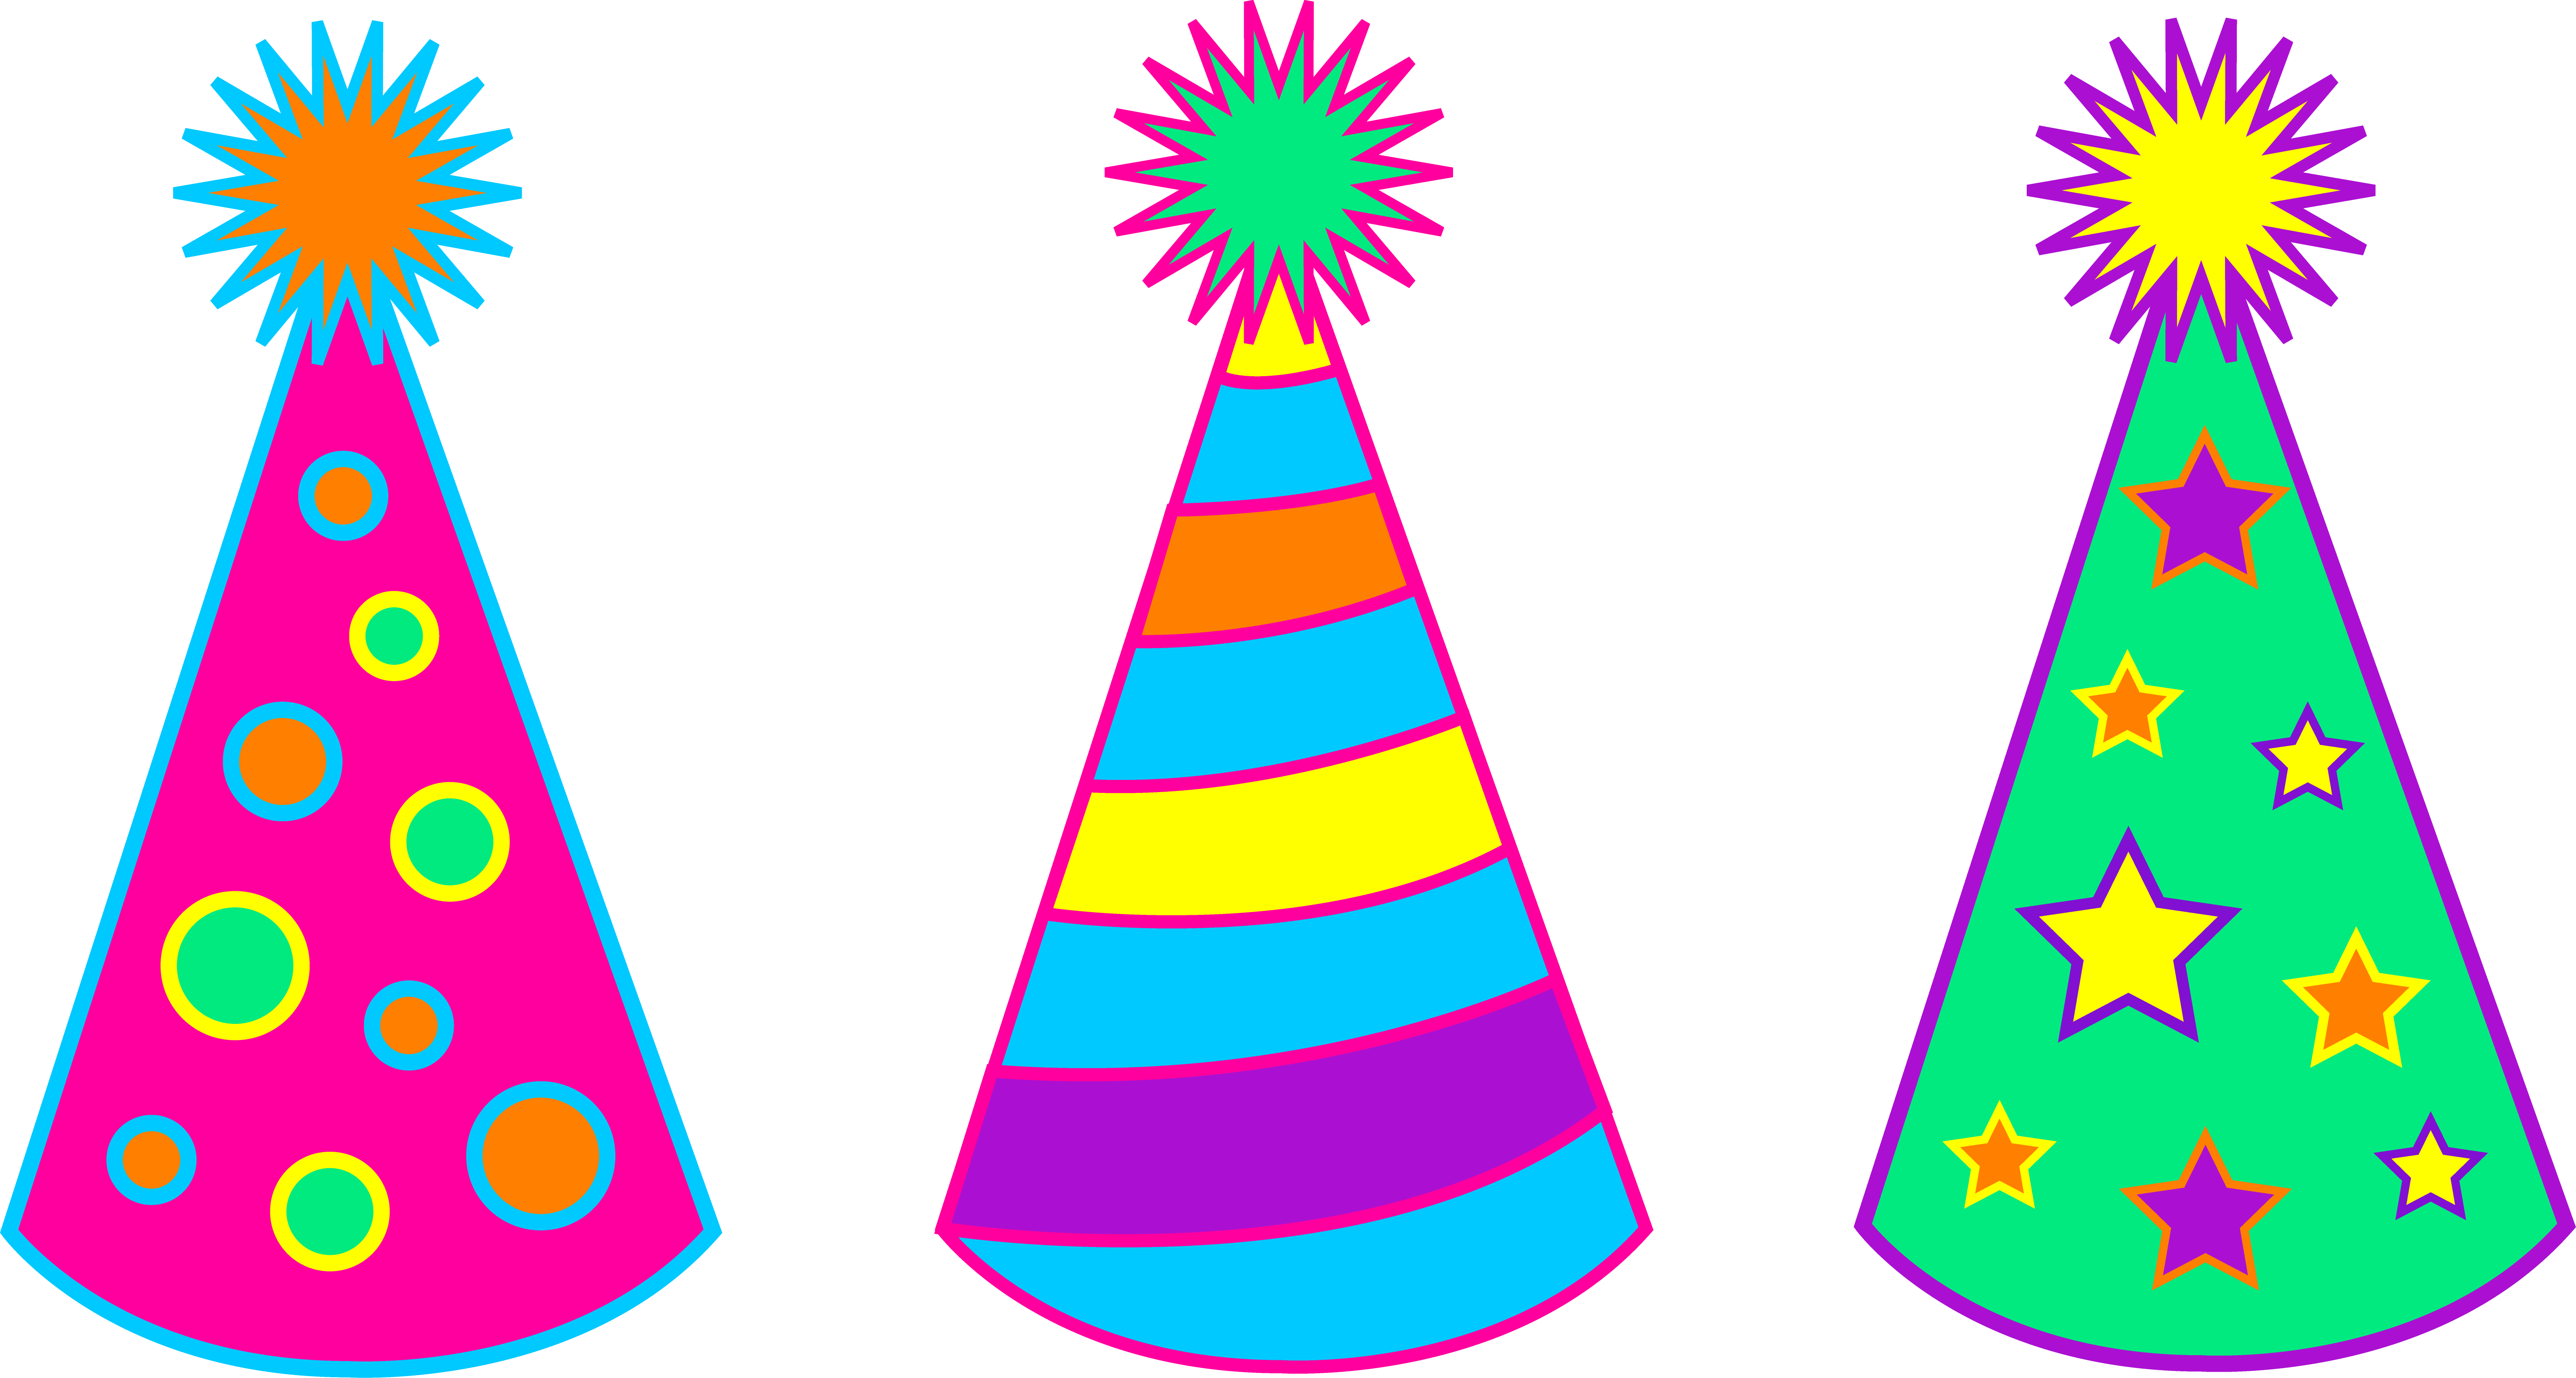 Birthday Hat Clipart Png | Clipart Panda - Free Clipart Images